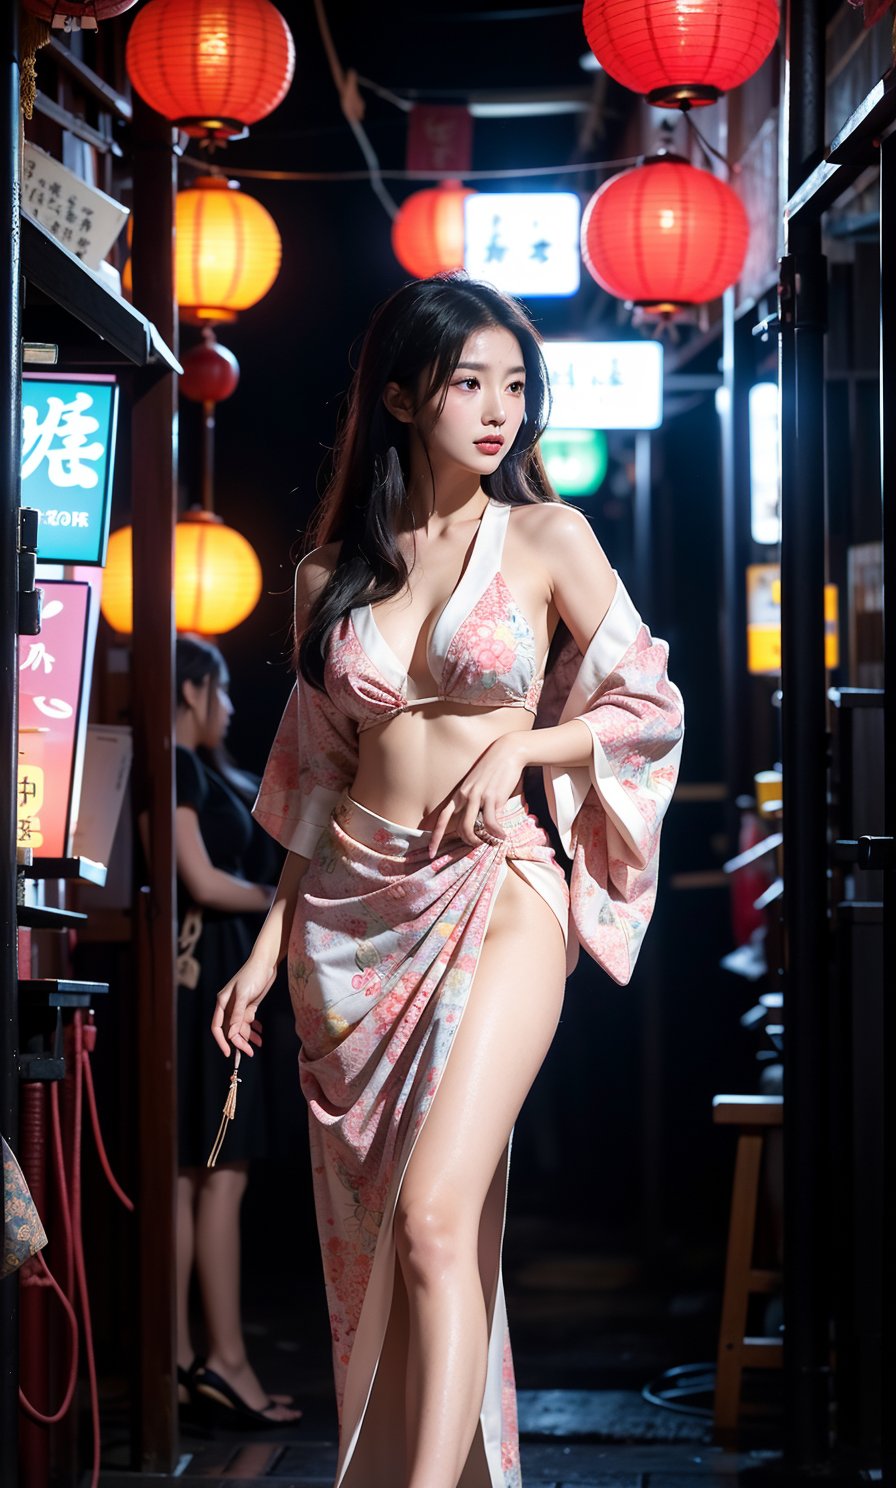 A serene Asian woman stands confidently in a dimly lit alleyway, her slender figure illuminated by the soft glow of lanterns overhead. She wears a traditional kimono with vibrant colors and intricate designs, its flowing fabric rustling softly as she poses, one hand resting on her hip, the other holding a delicate fans. Hottest Queen, ,nhaythoaty,Asia